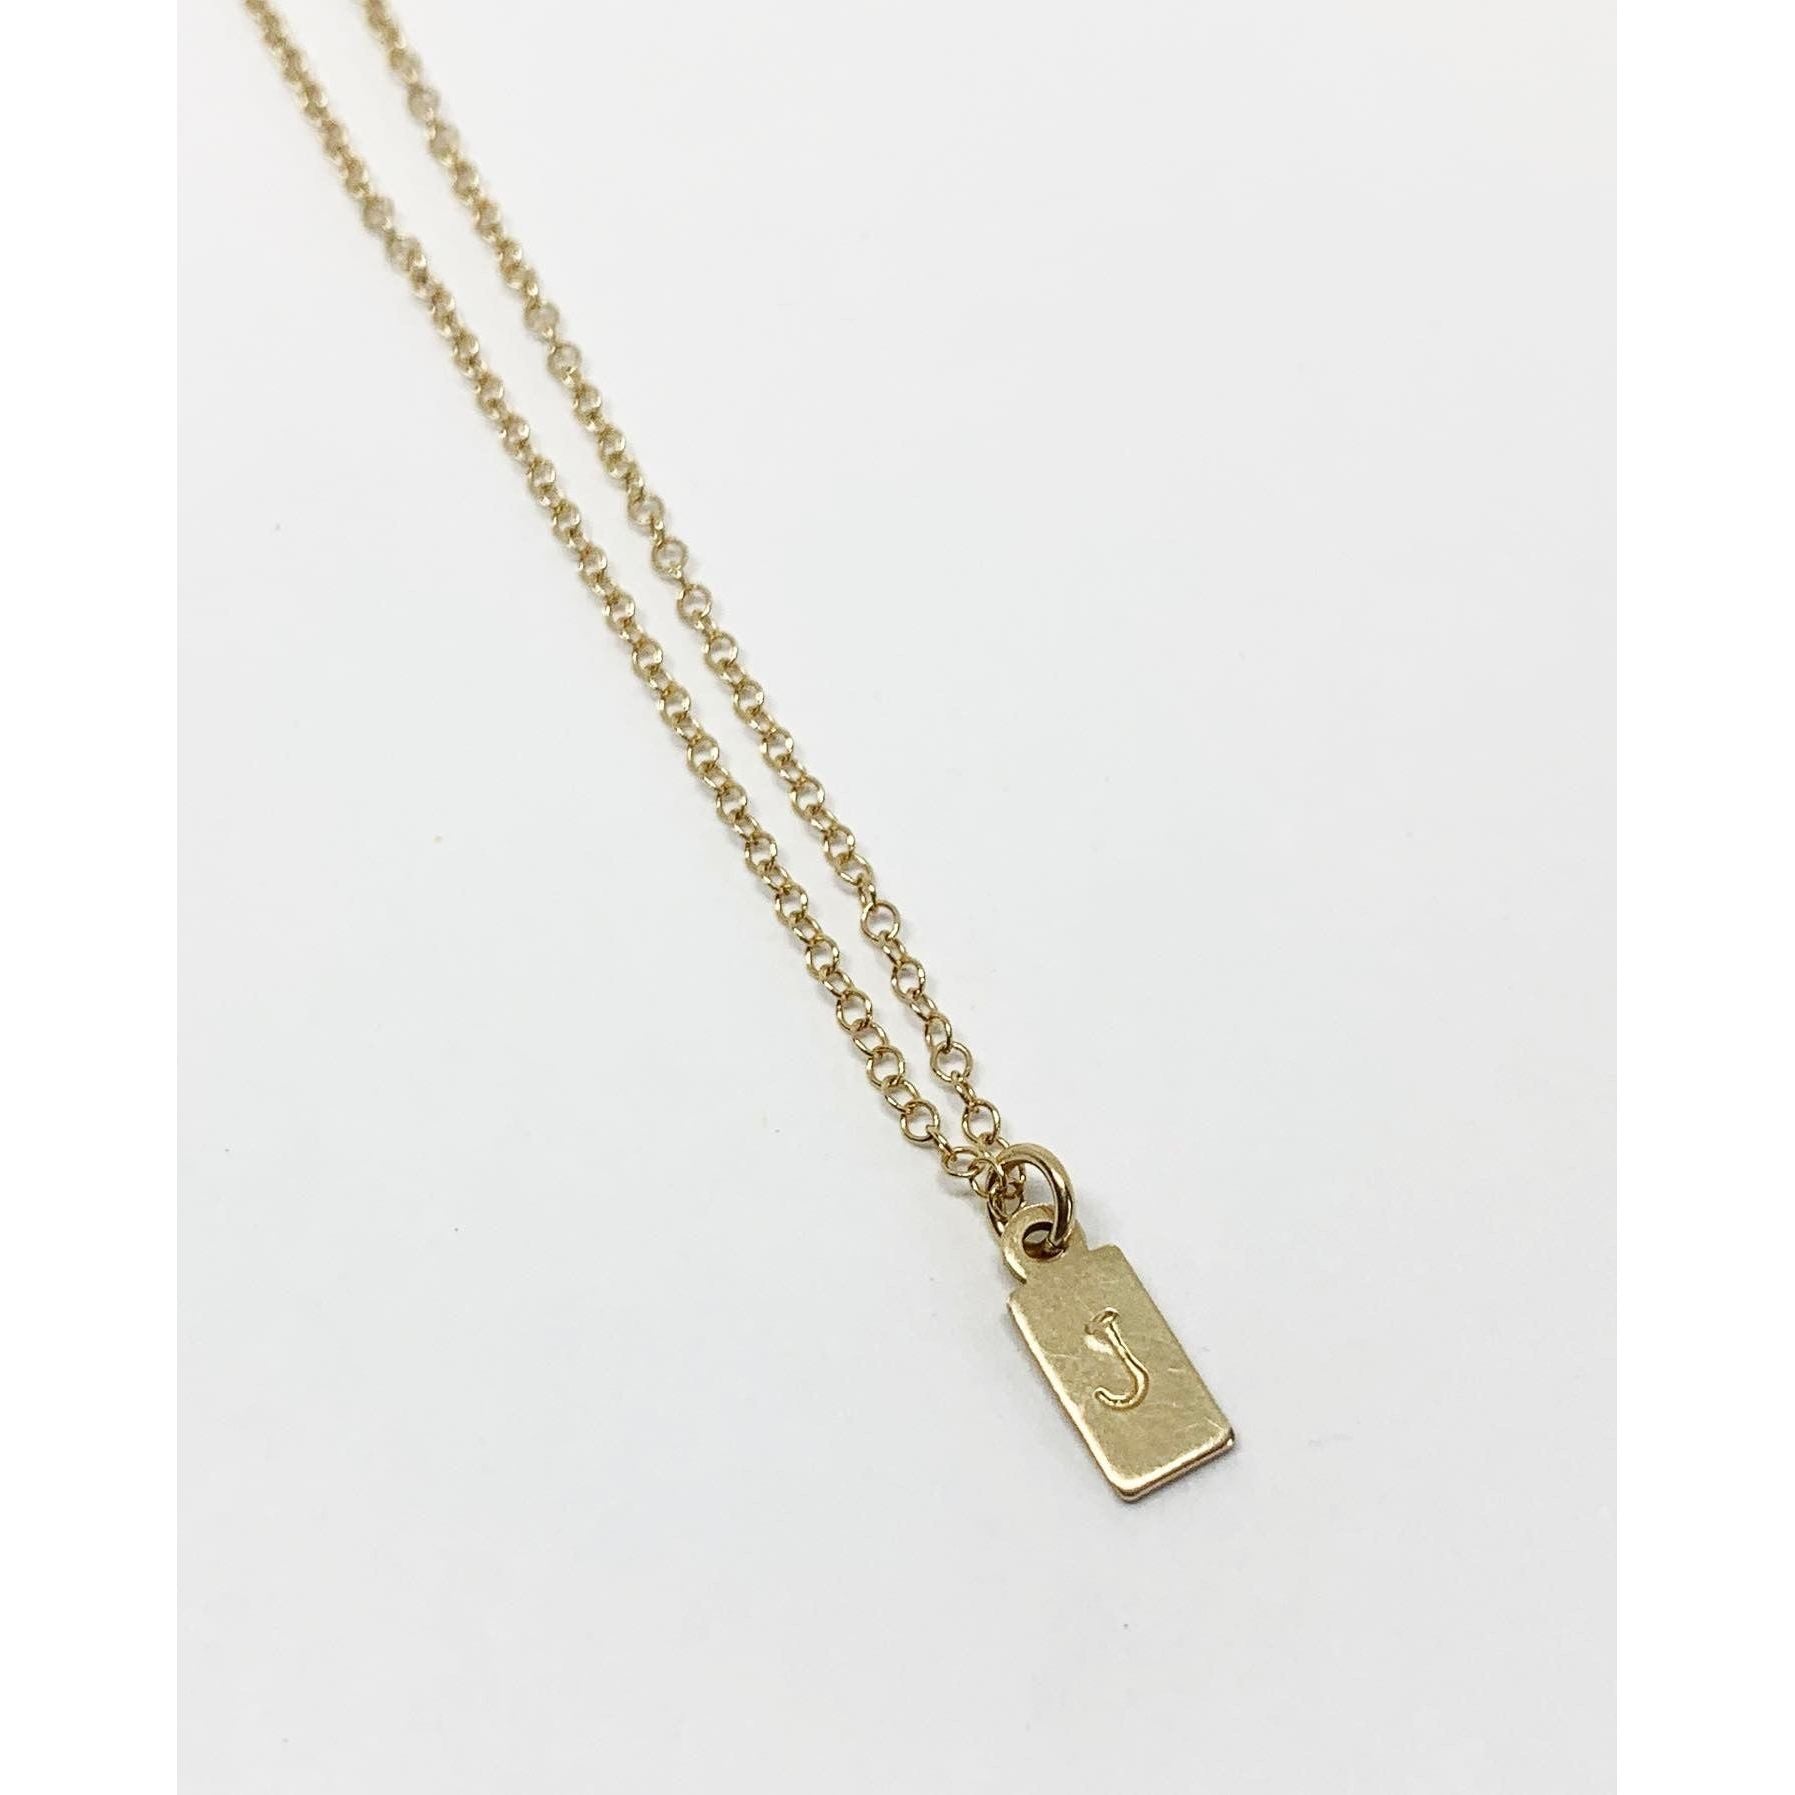 Signature Elegance: Personalized Initial Tag Necklace for Timeless Sophistication - KME means the very best